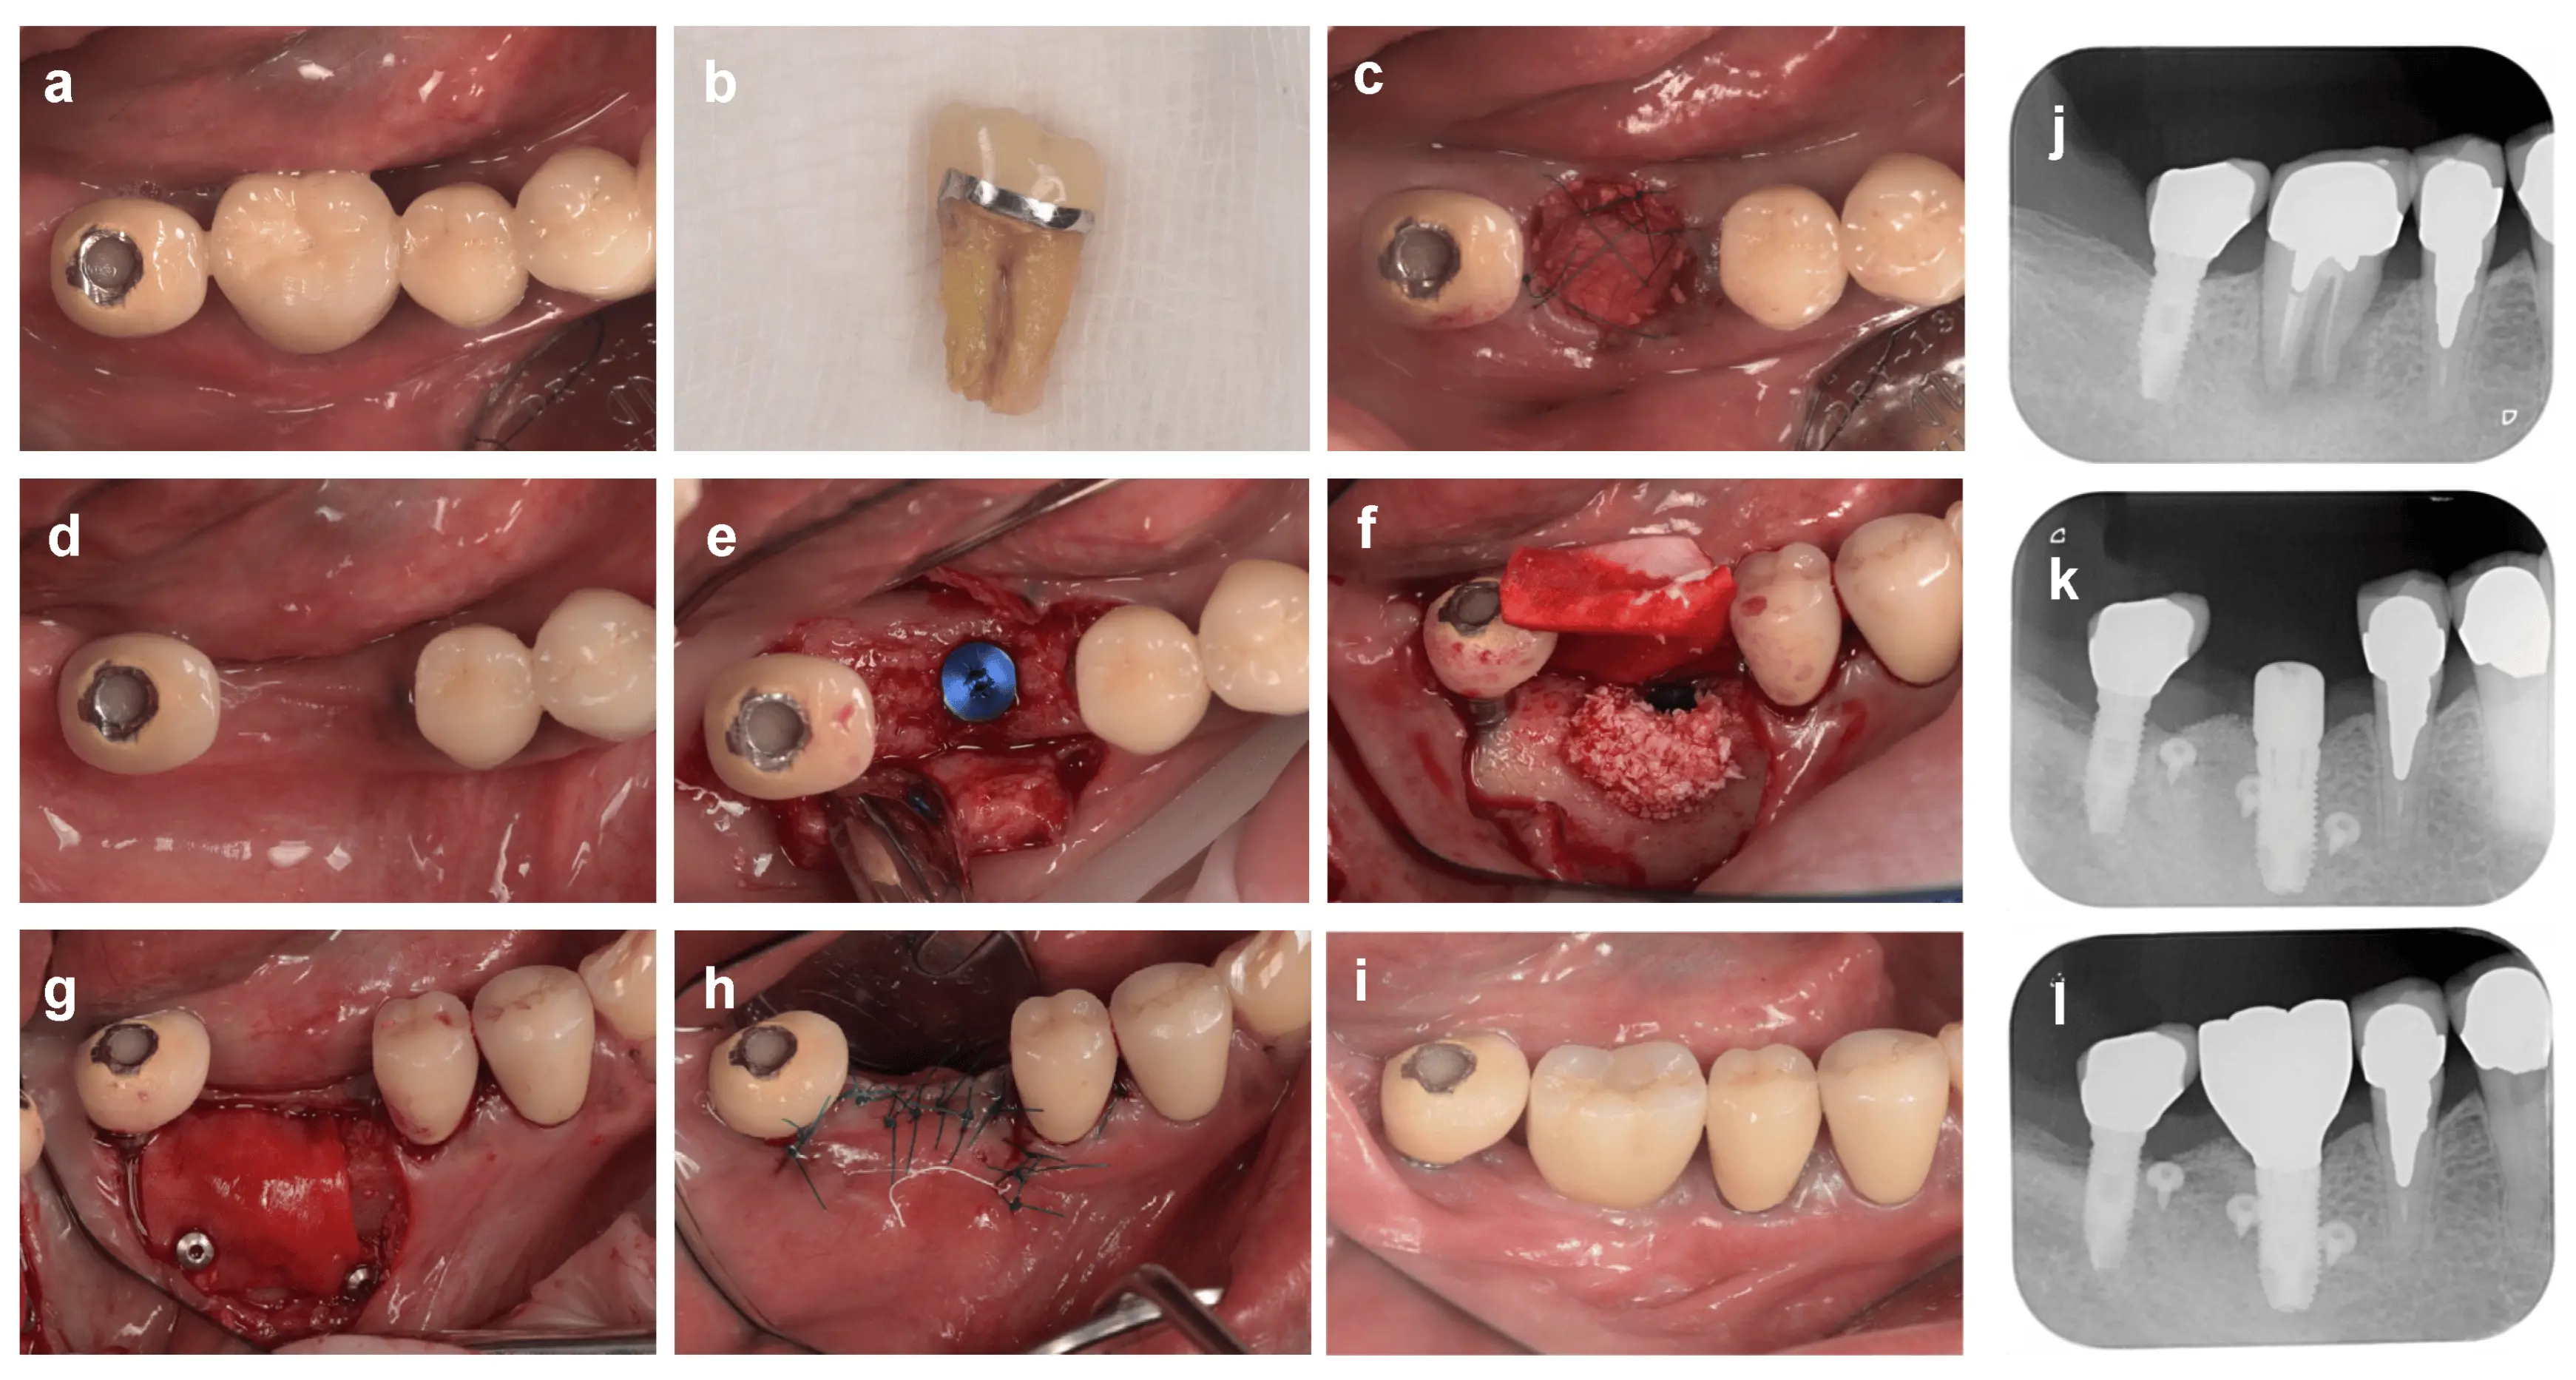 Alveolar ridge preservation after extraction may  obviate need for additional  augmentation during implant placement: Study